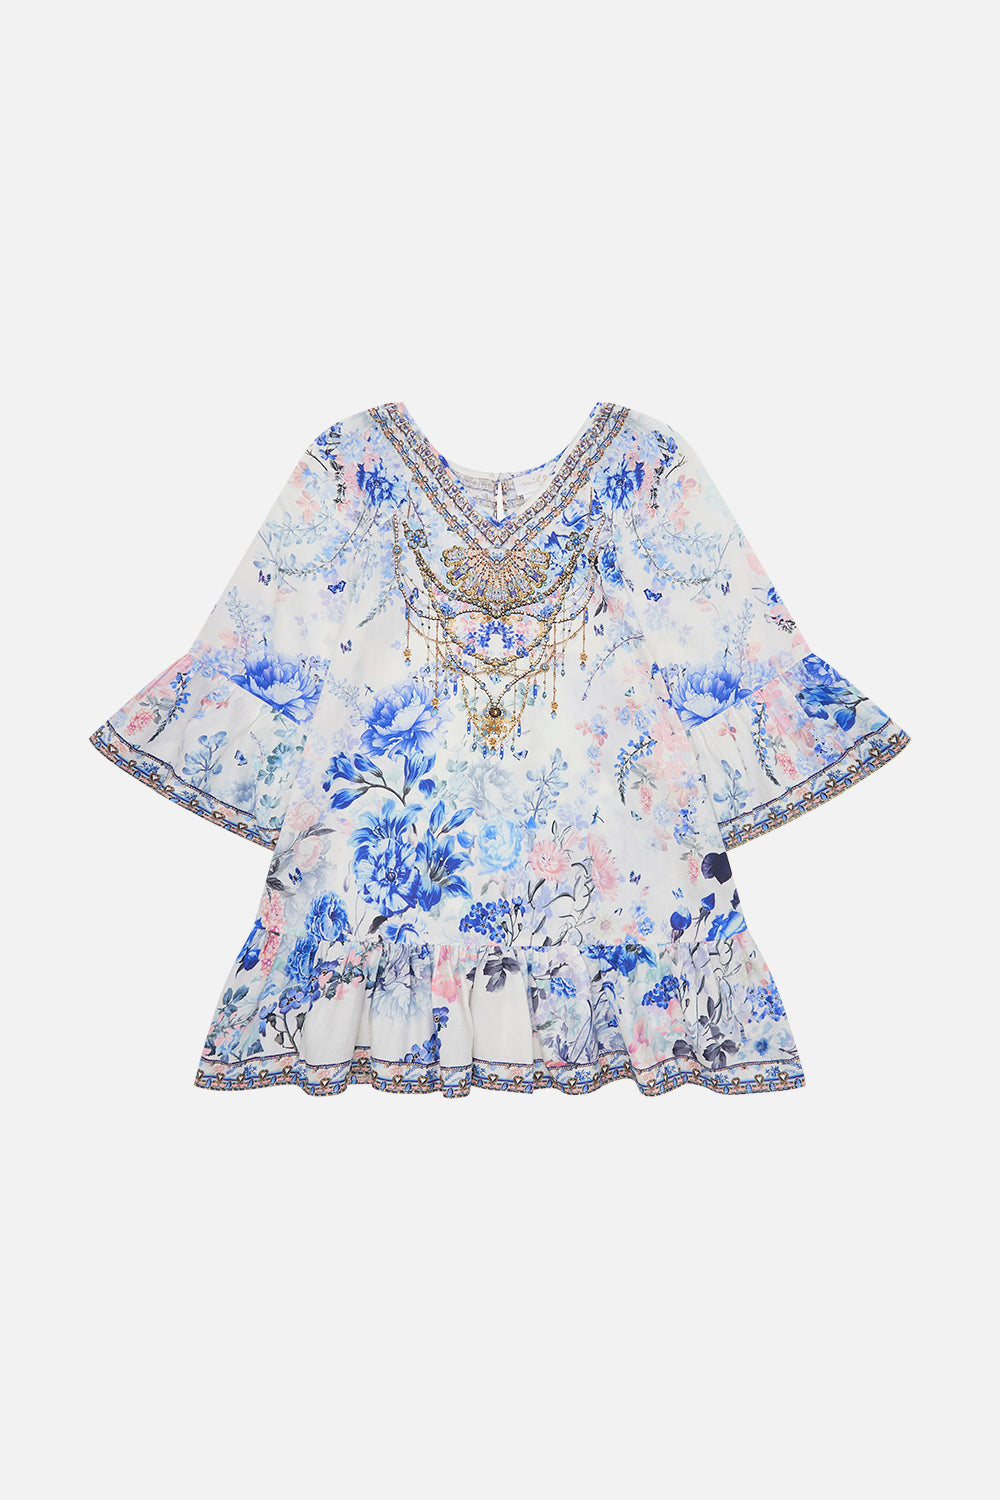 Product view of MILLA BY CAMILLA kids floral dress in Tuscan Moondance print